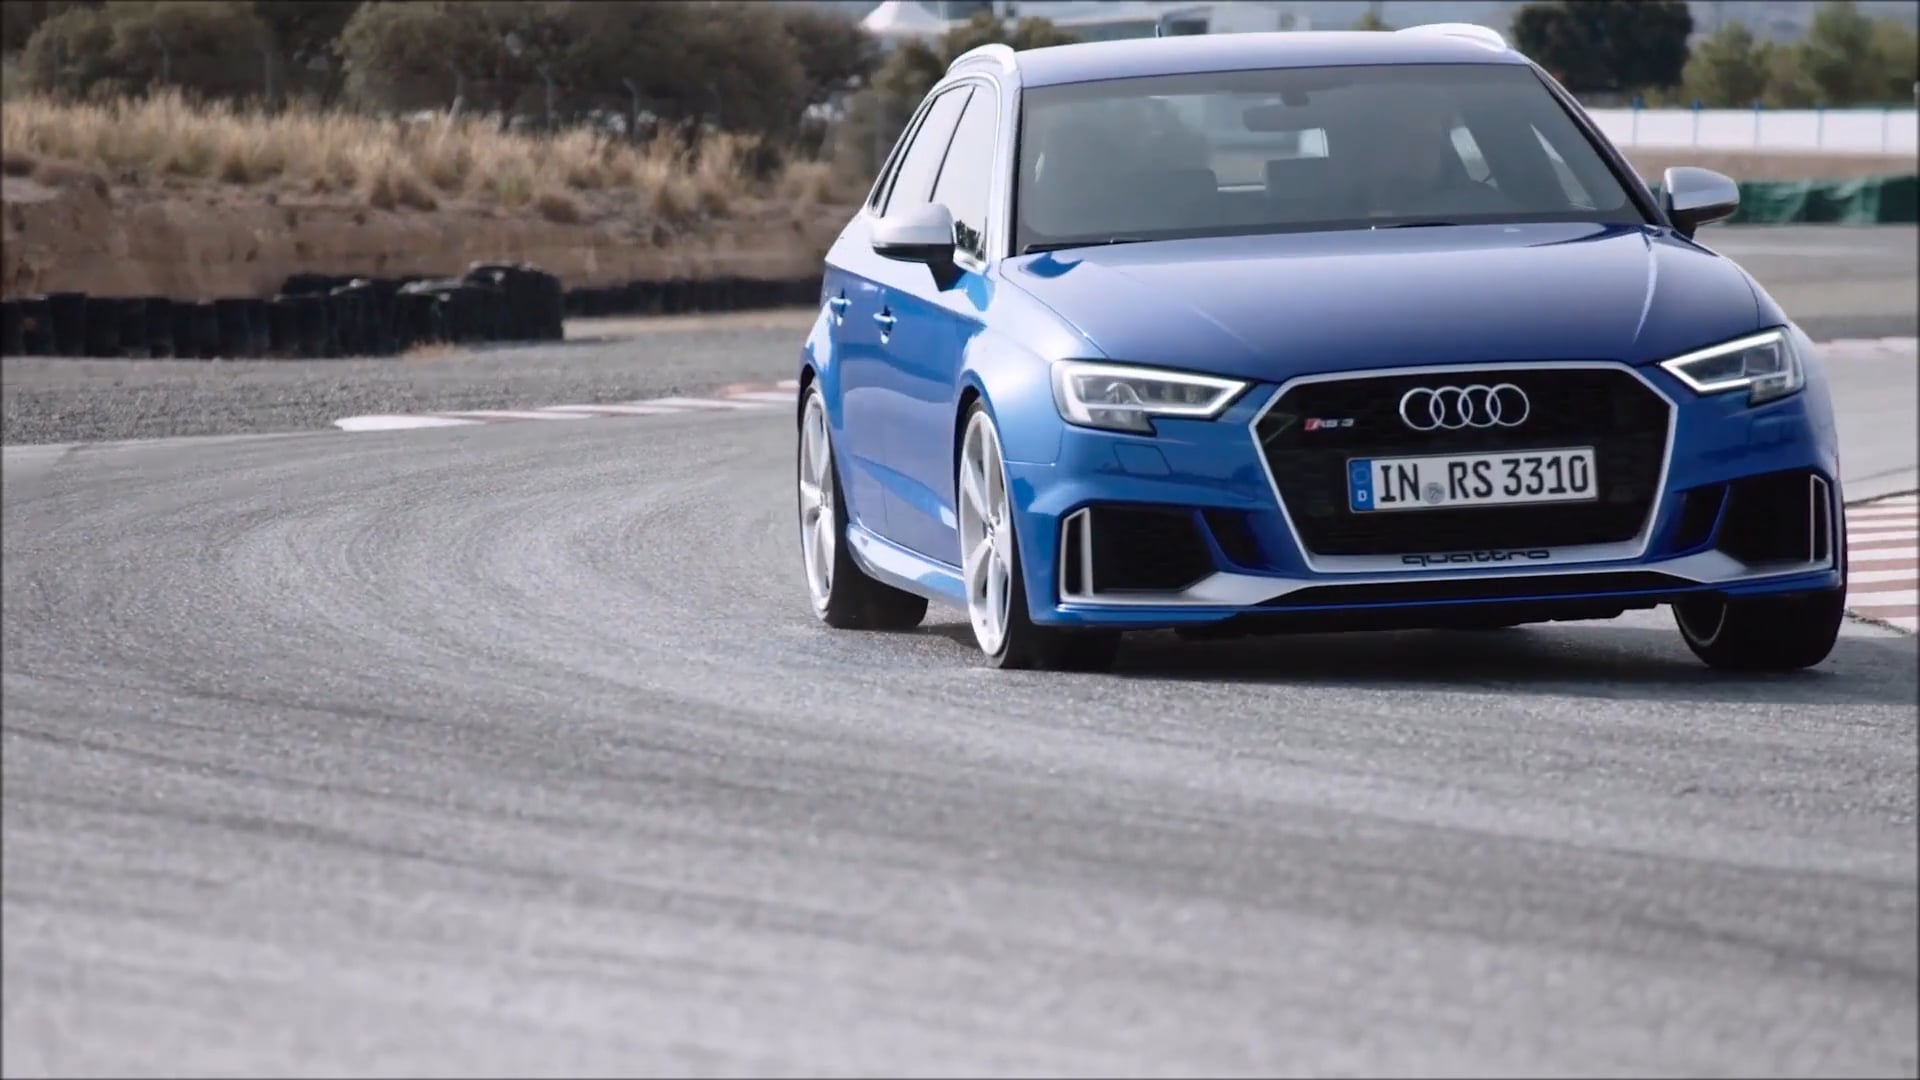 Overview: 2018 Audi RS 3 Sportback